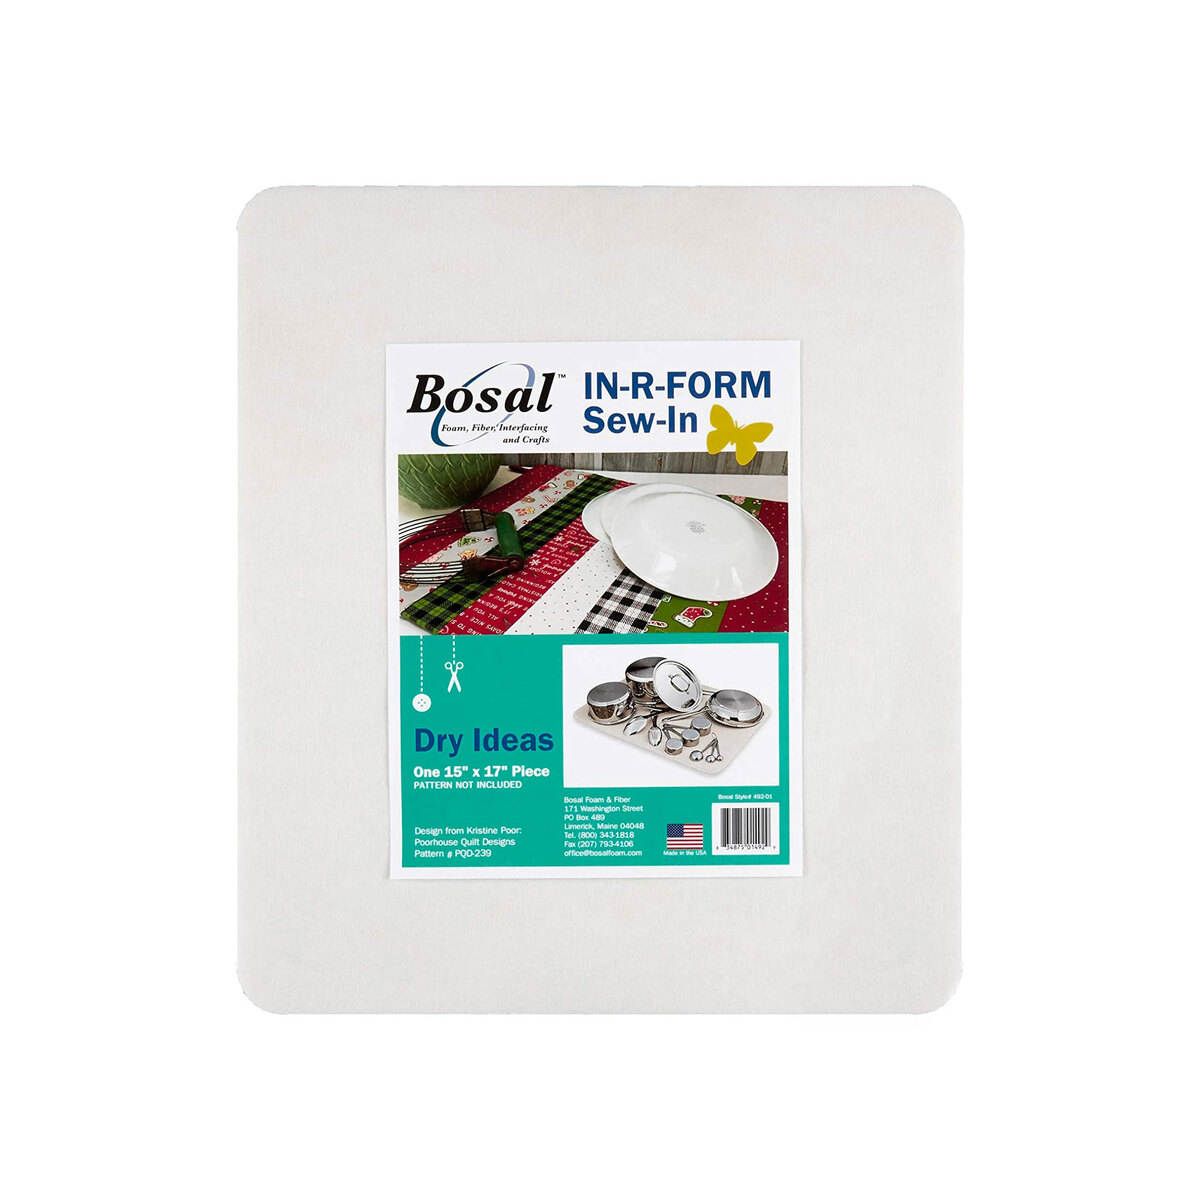 Bosal In-R-Form on a Roll Single Sided Fusible Stabilizer - 2 1/4 x 2